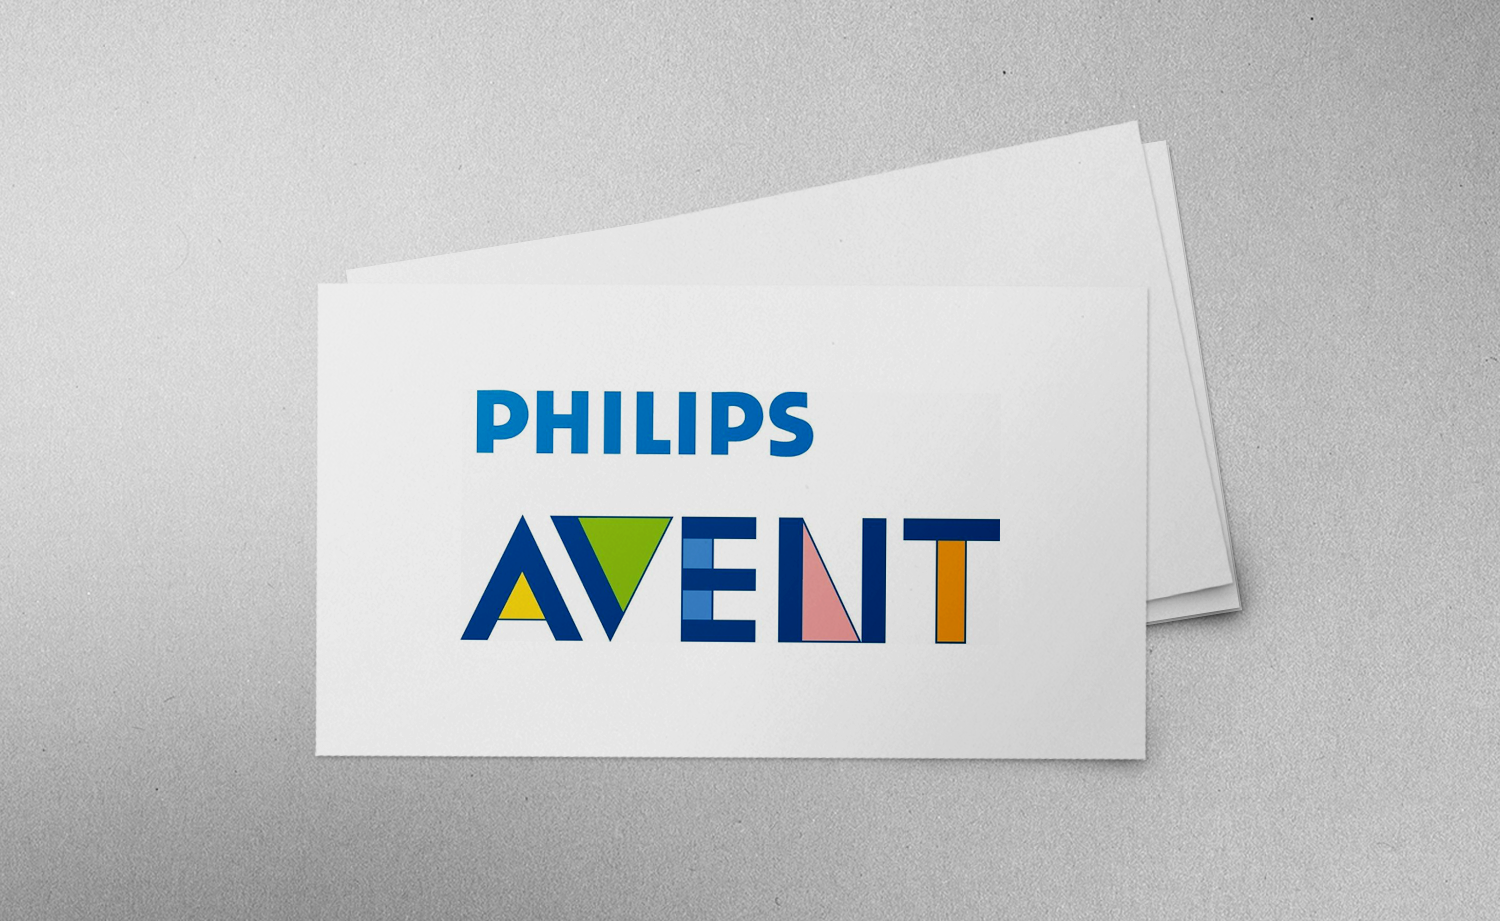 Third time for Philips – 25 years of AVENT